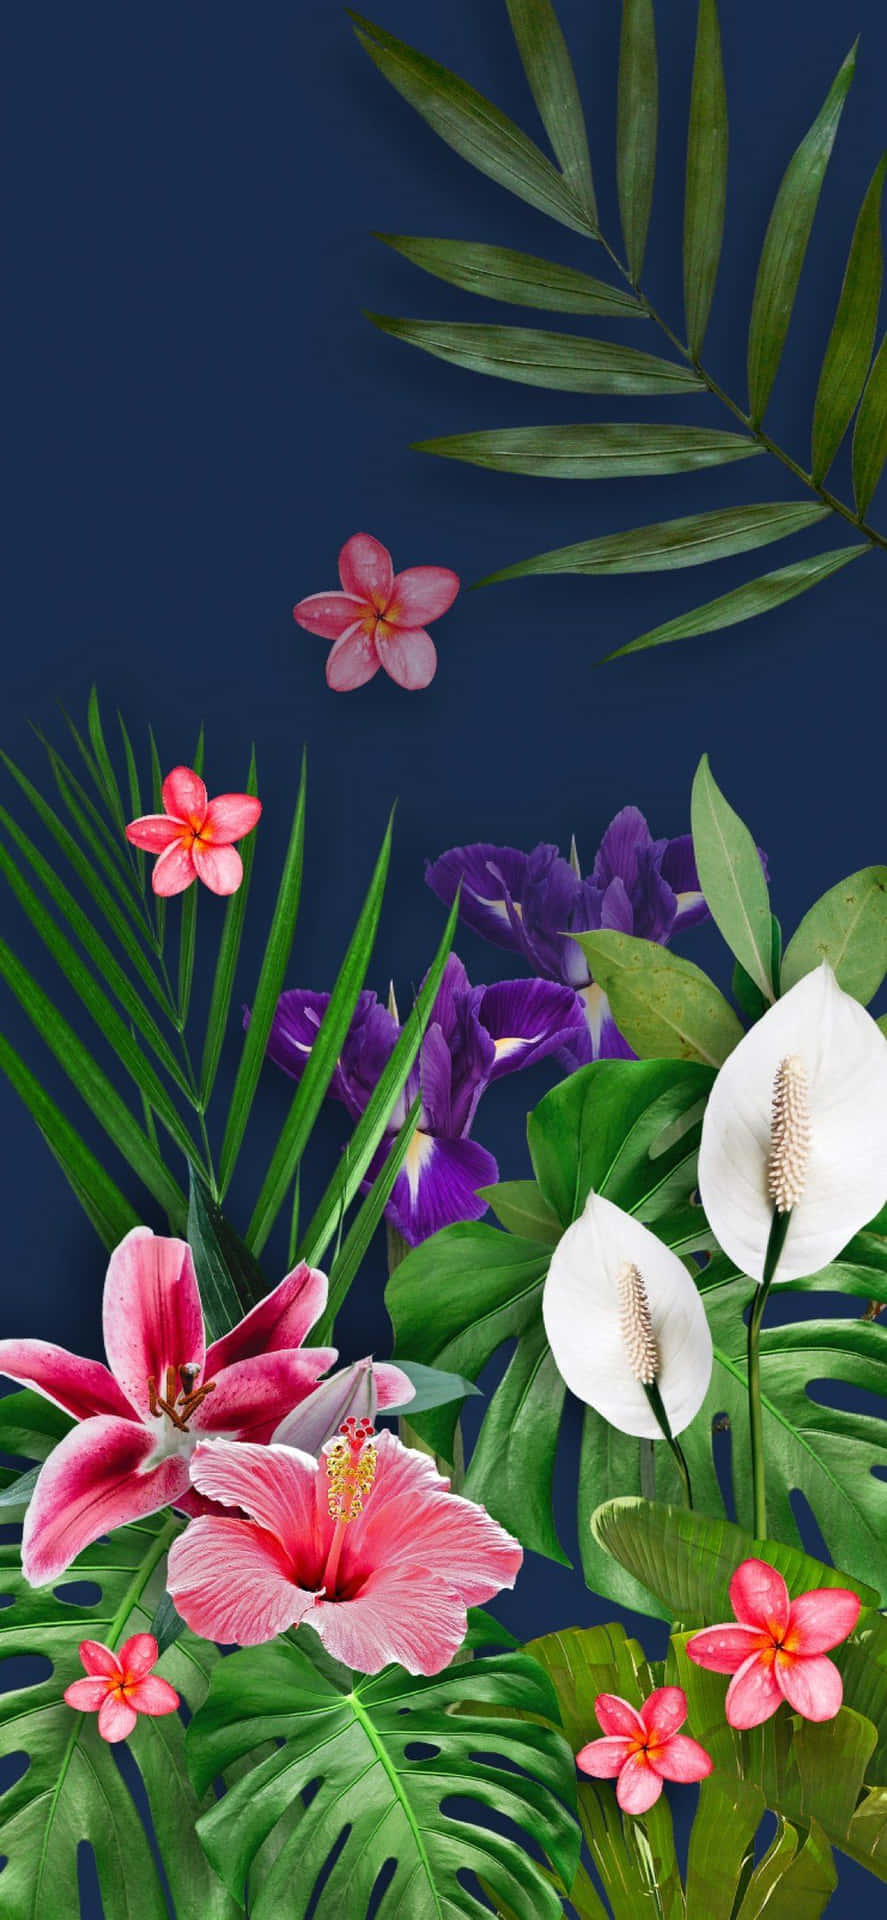 A Picture Of Tropical Flowers On A Blue Background Wallpaper